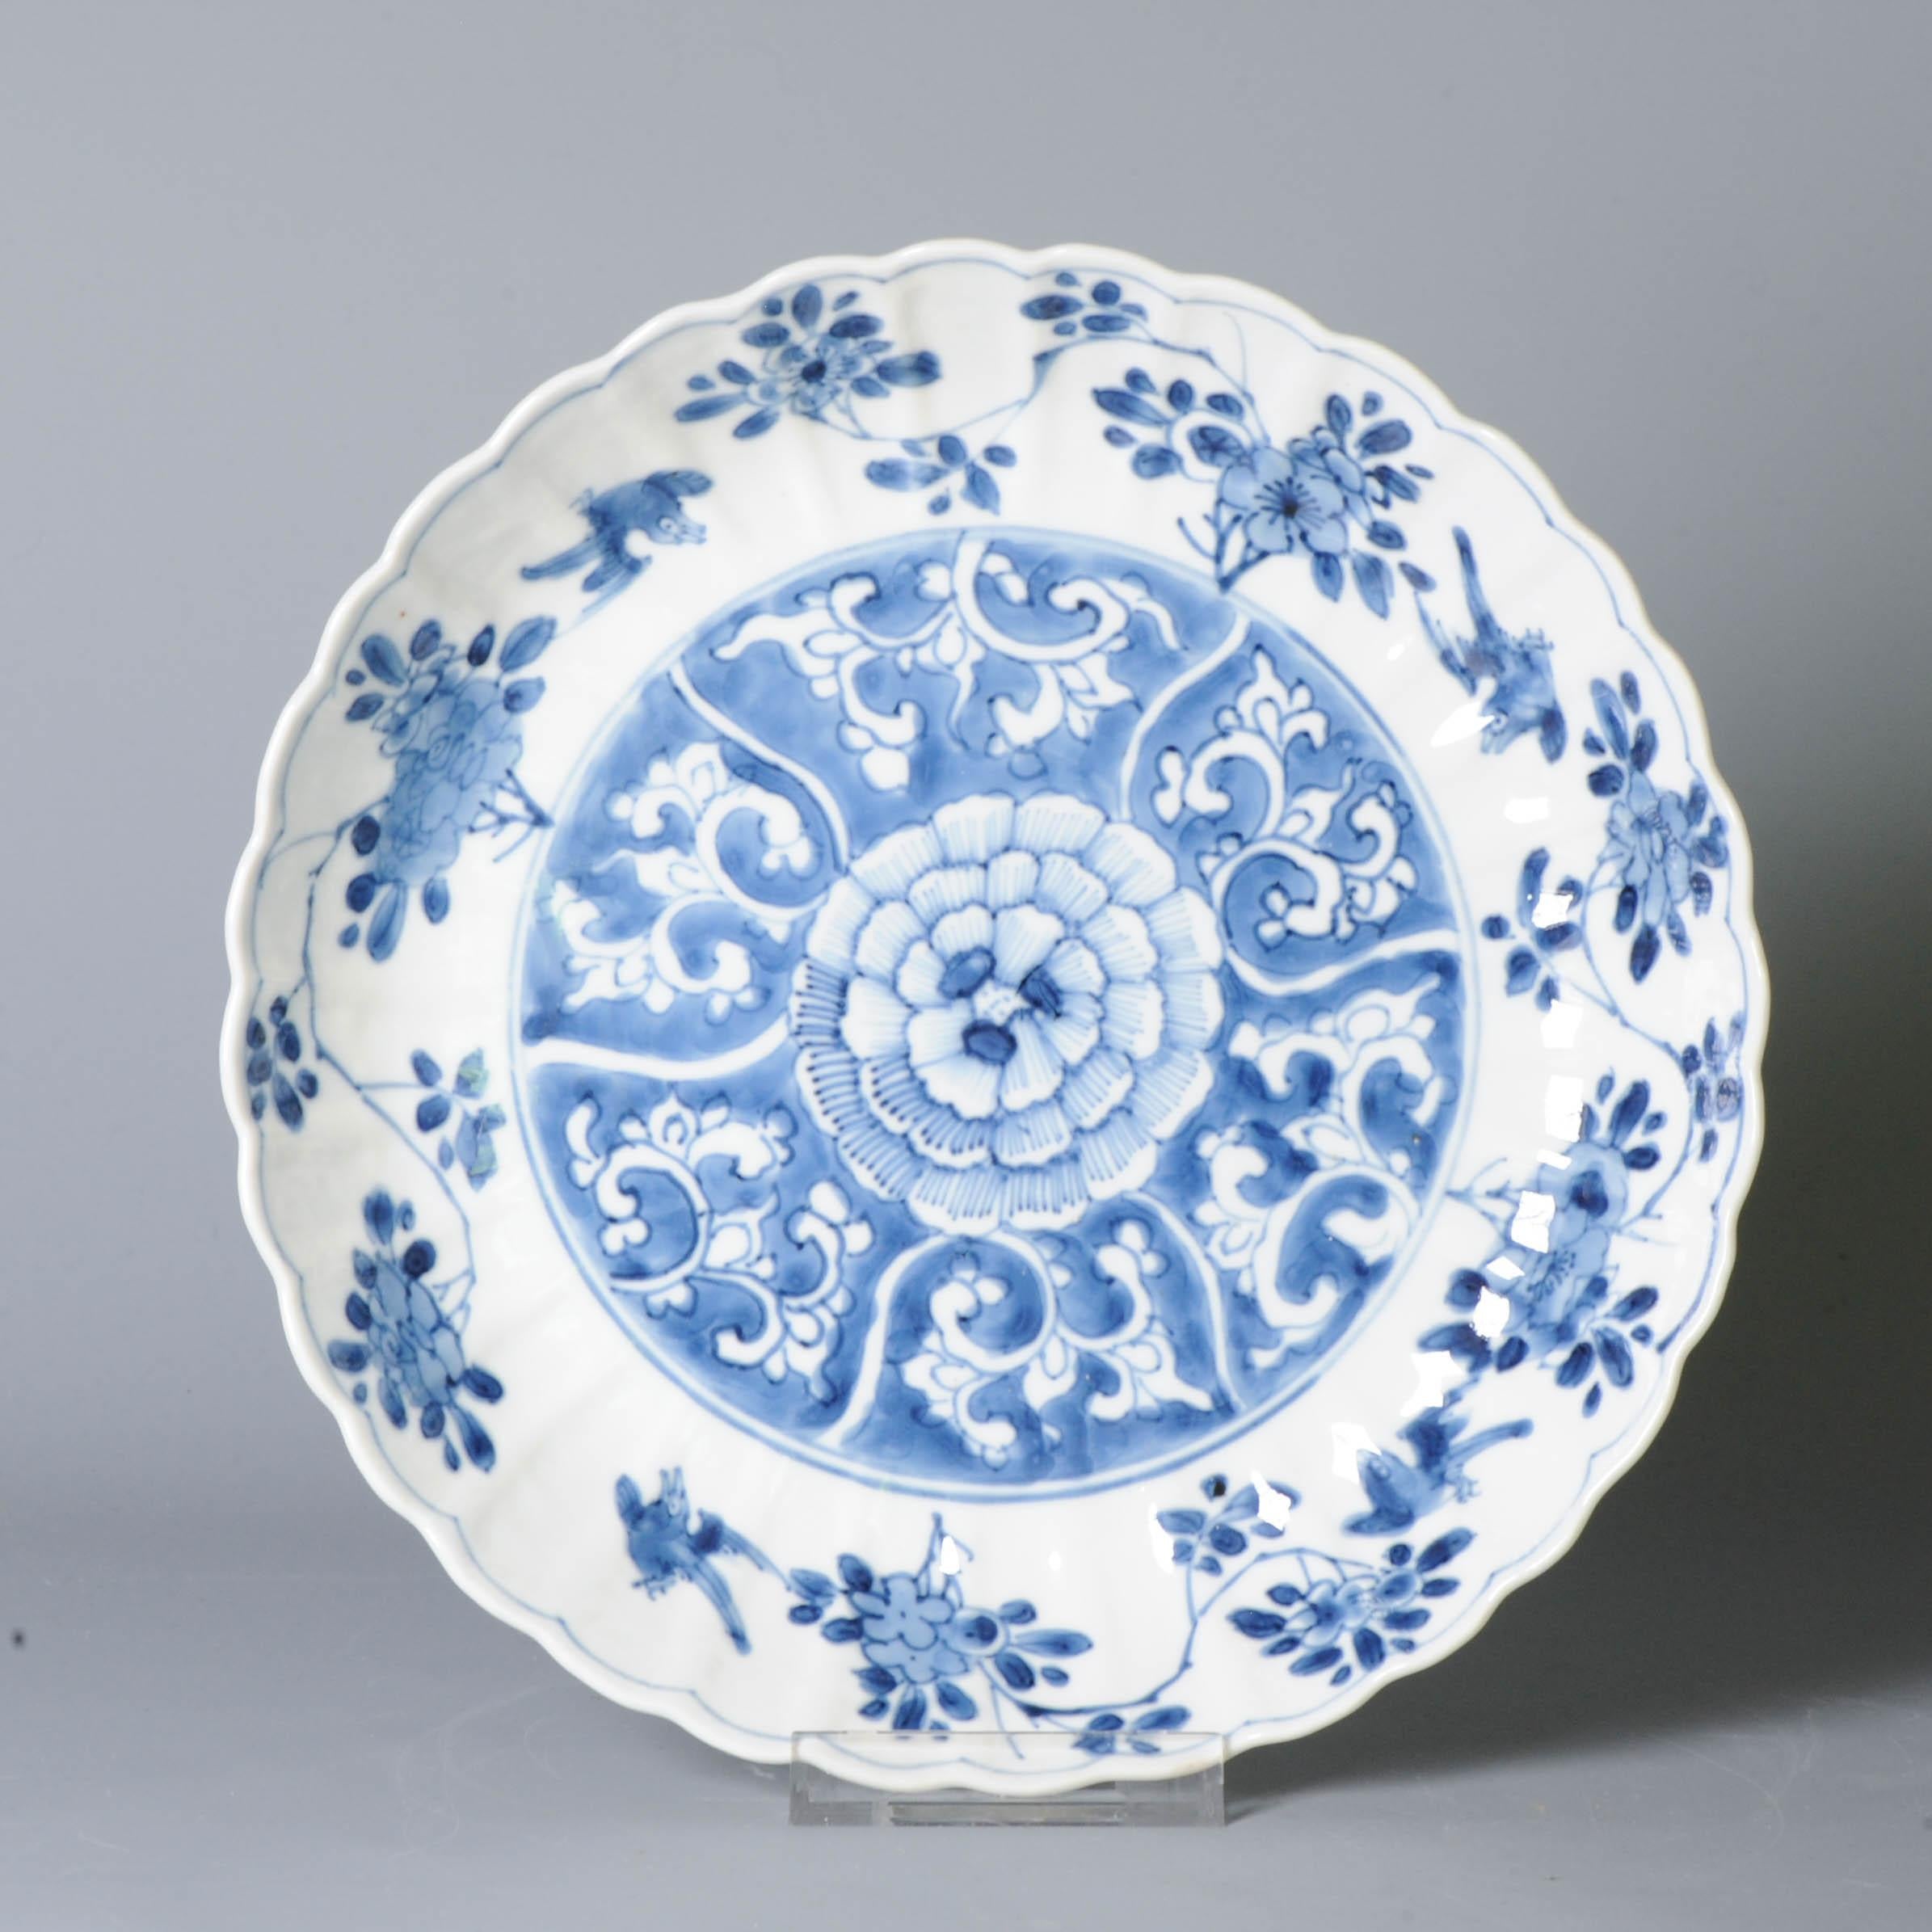 Chinese A Rare Kangxi porcelain Blue and White Plates with Bird and floral decoration